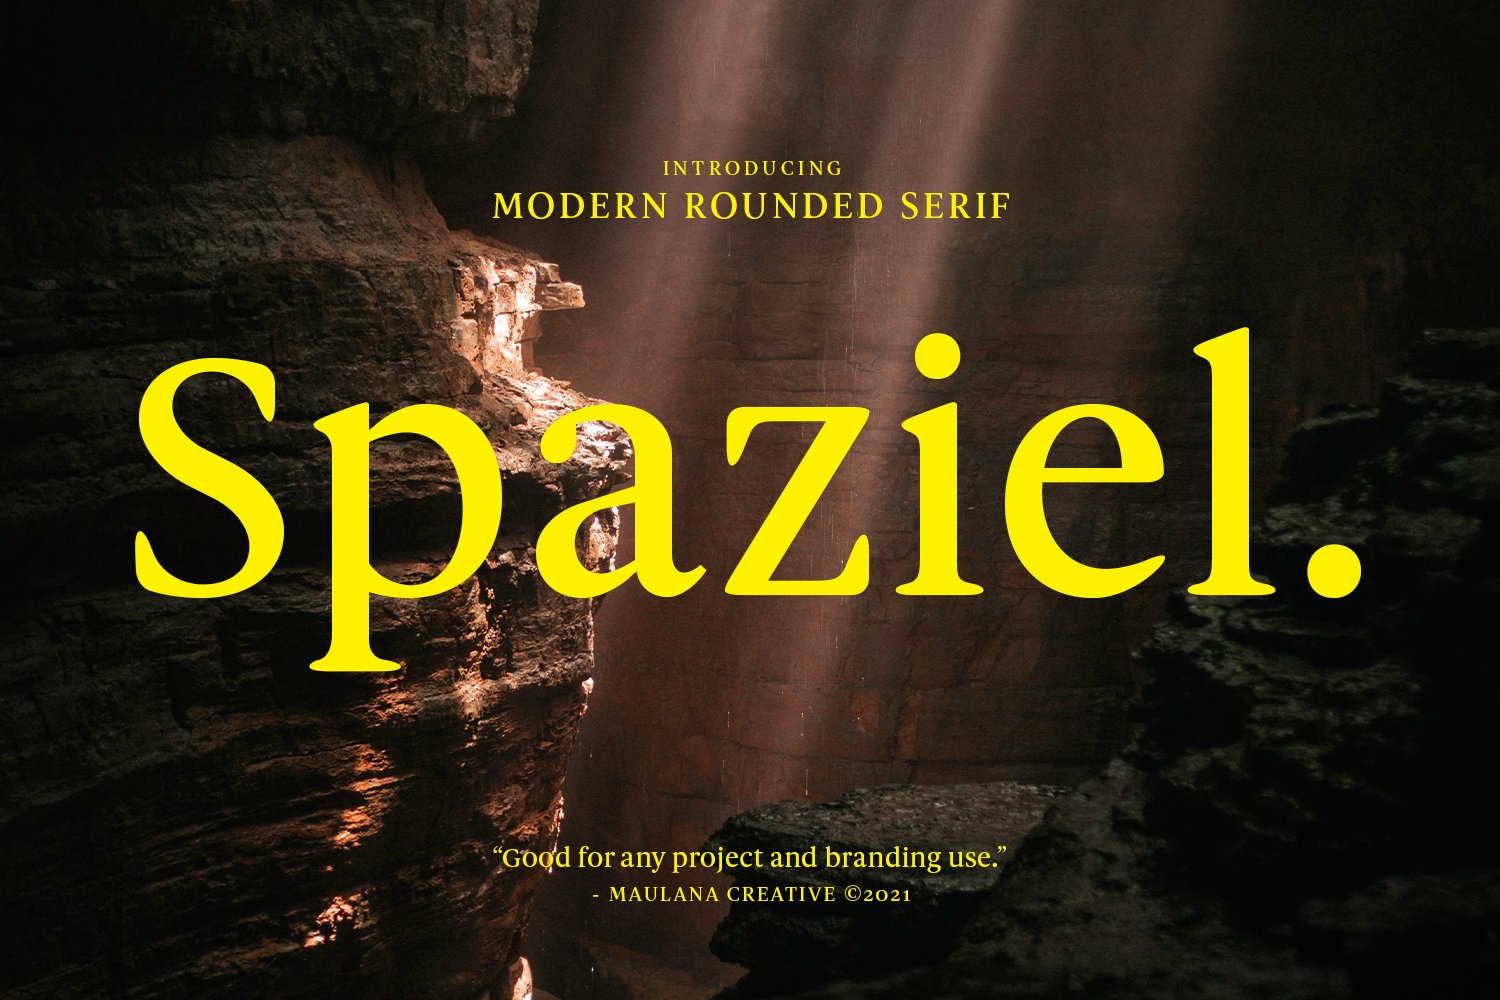 Spaziel Modern Rounded Serif Font cover image.